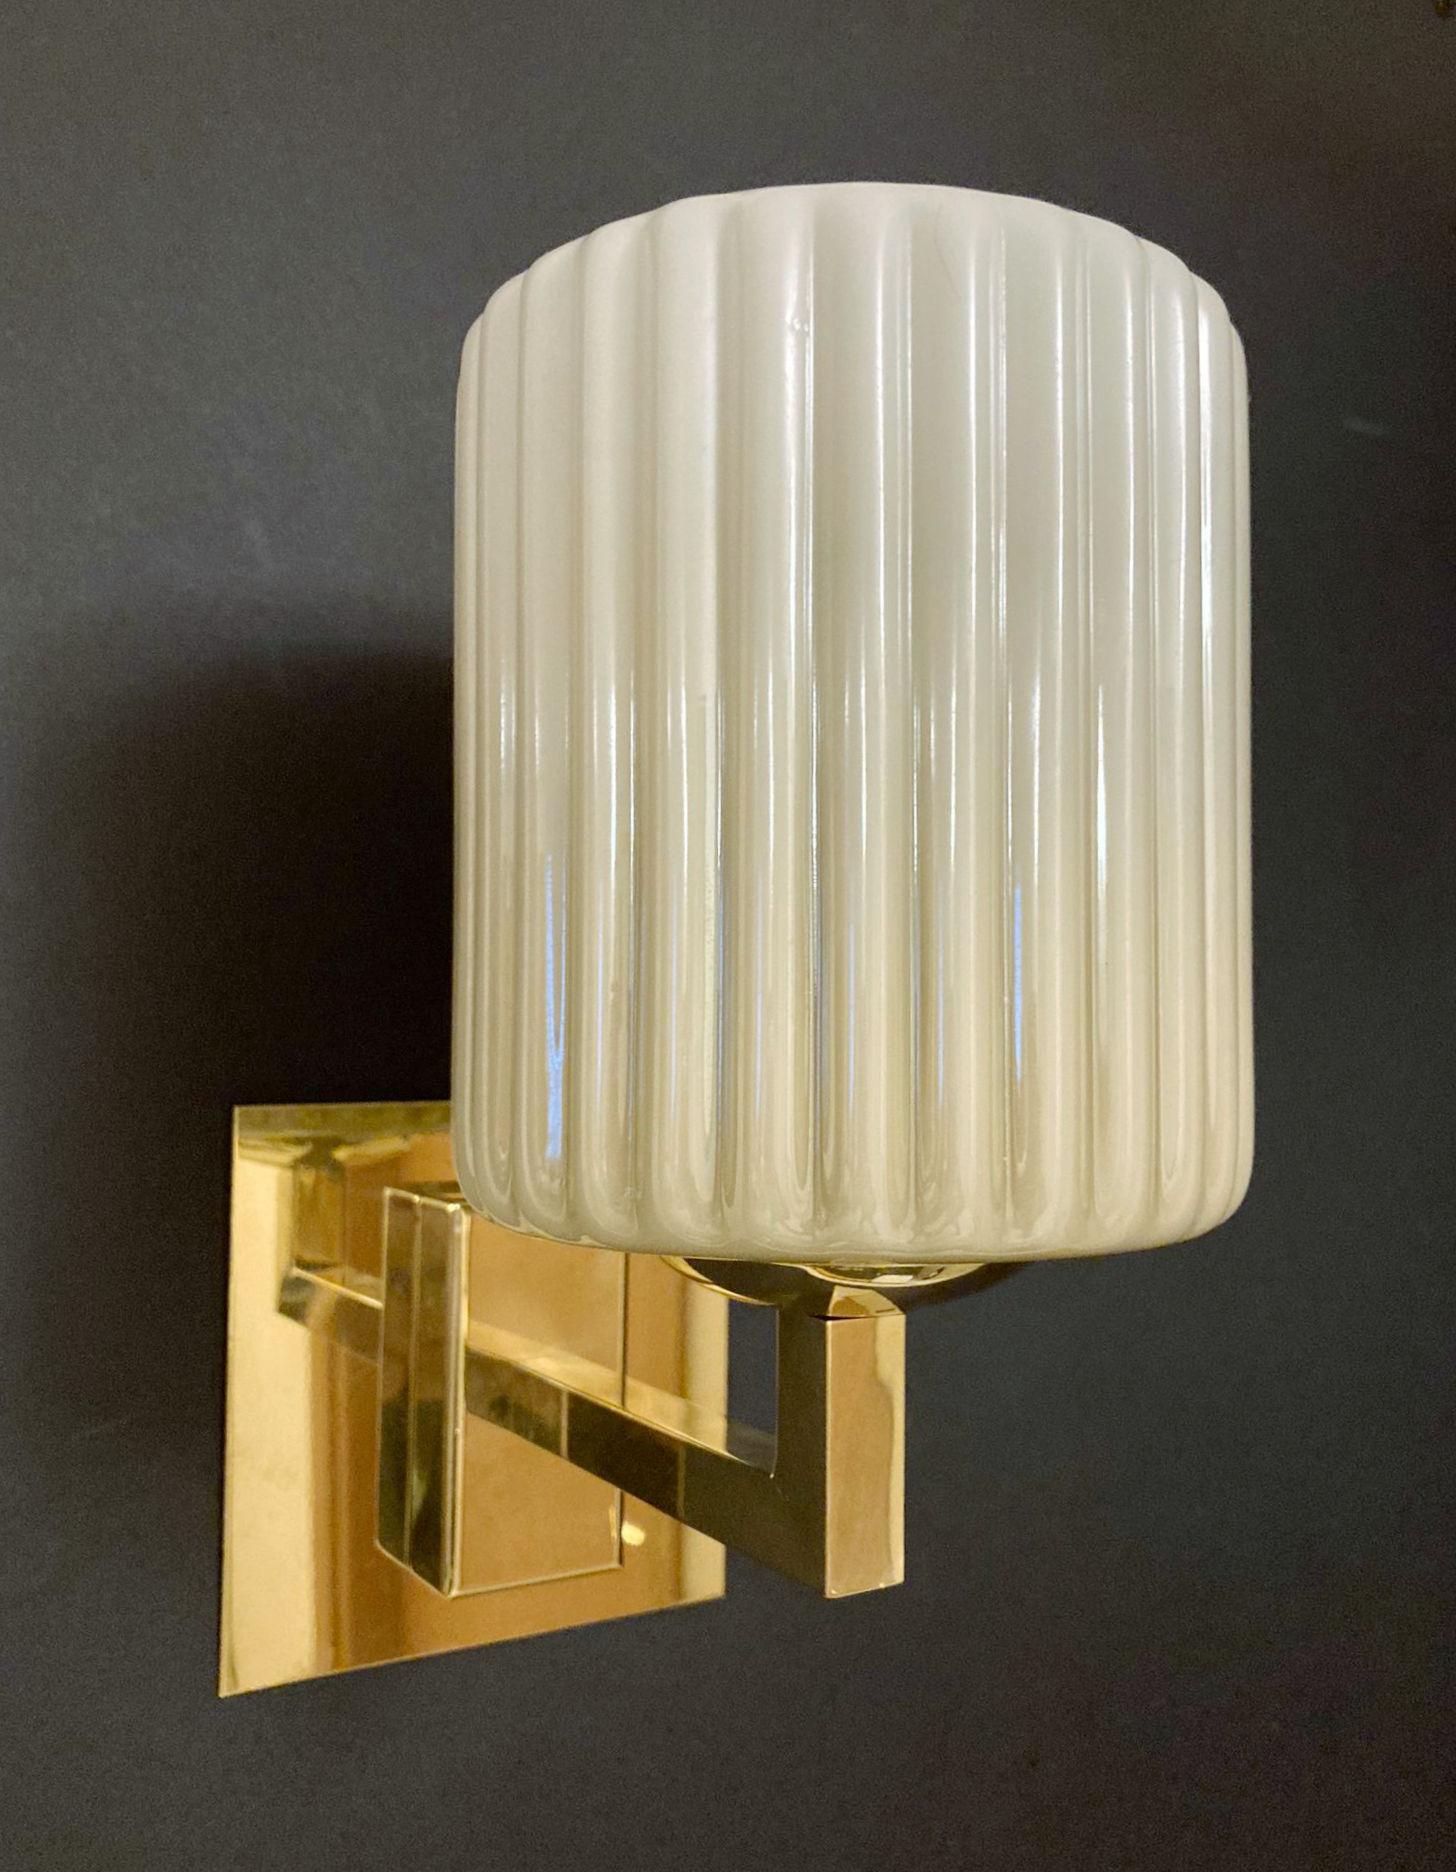 Italian wall lights with smoky ribbed Murano glass shades mounted on brass frames / Made in Italy by Barovier e Toso, circa 1950s
Original mark on the backplate
Measures: Height 10 inches, width 5 inches, depth 8 inches, backplate width 4.7 inches